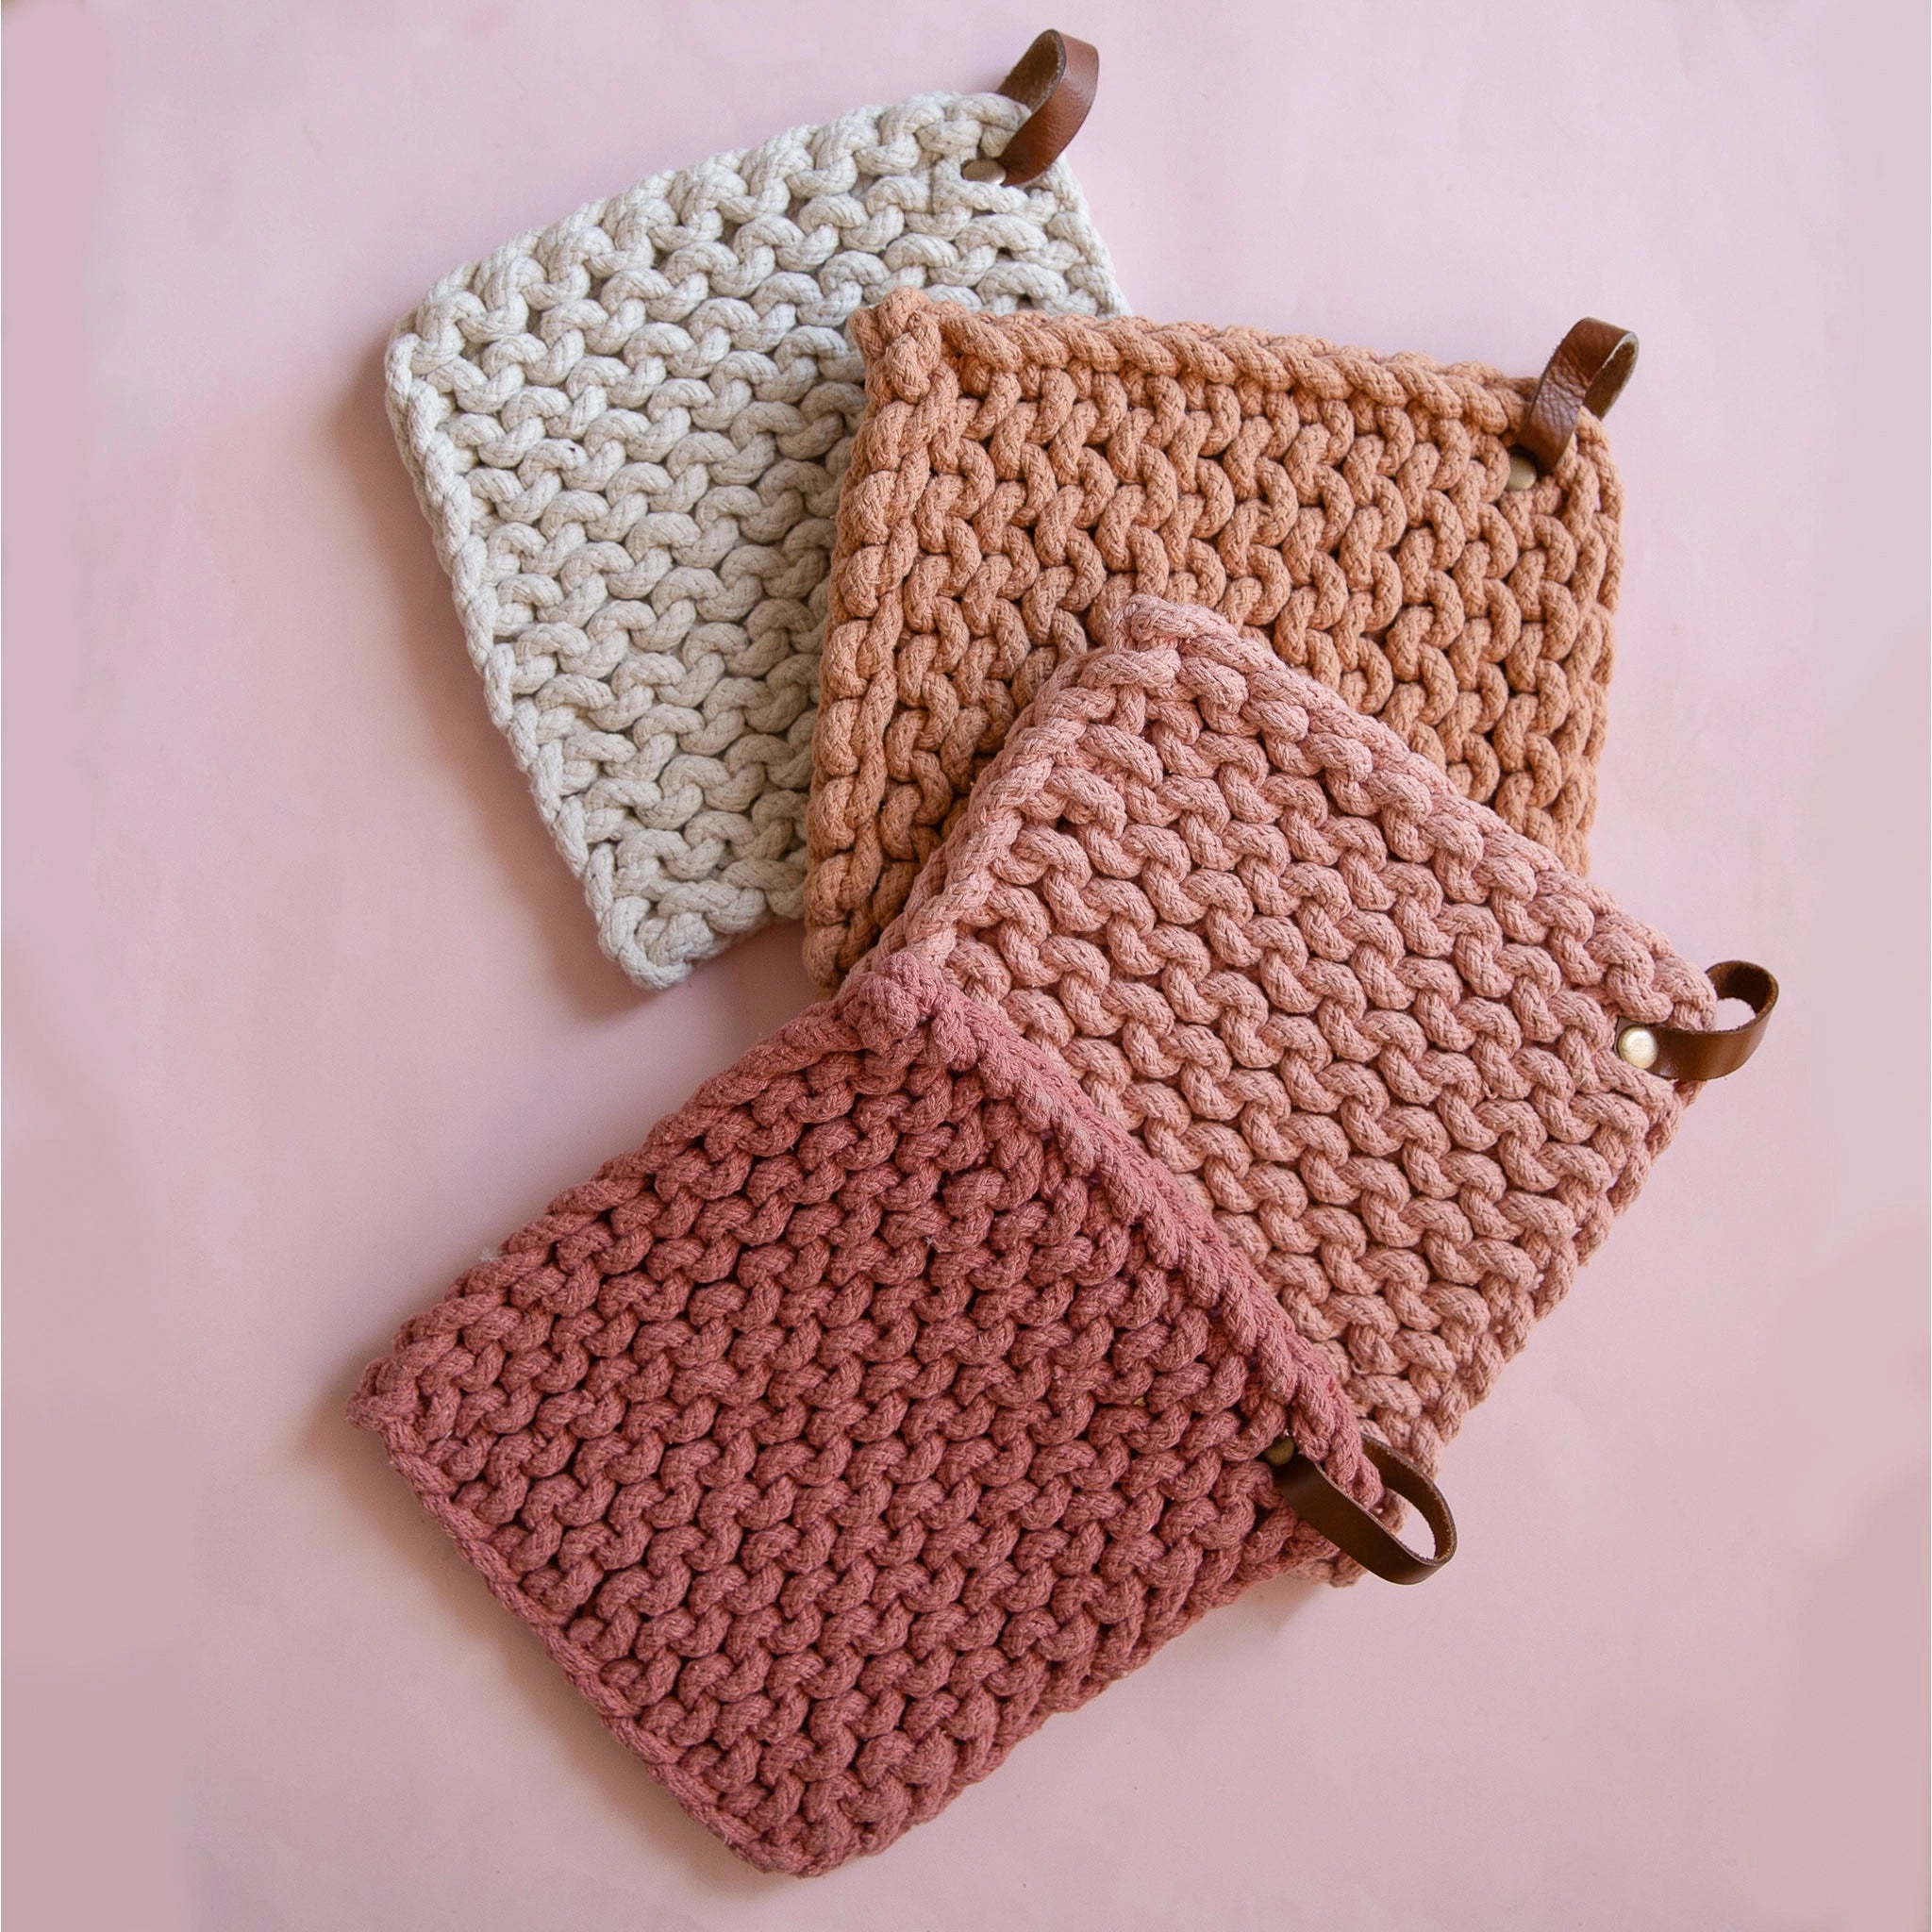 On a pink background is four square crocheted pot holders in a range of pink and cream shades. 